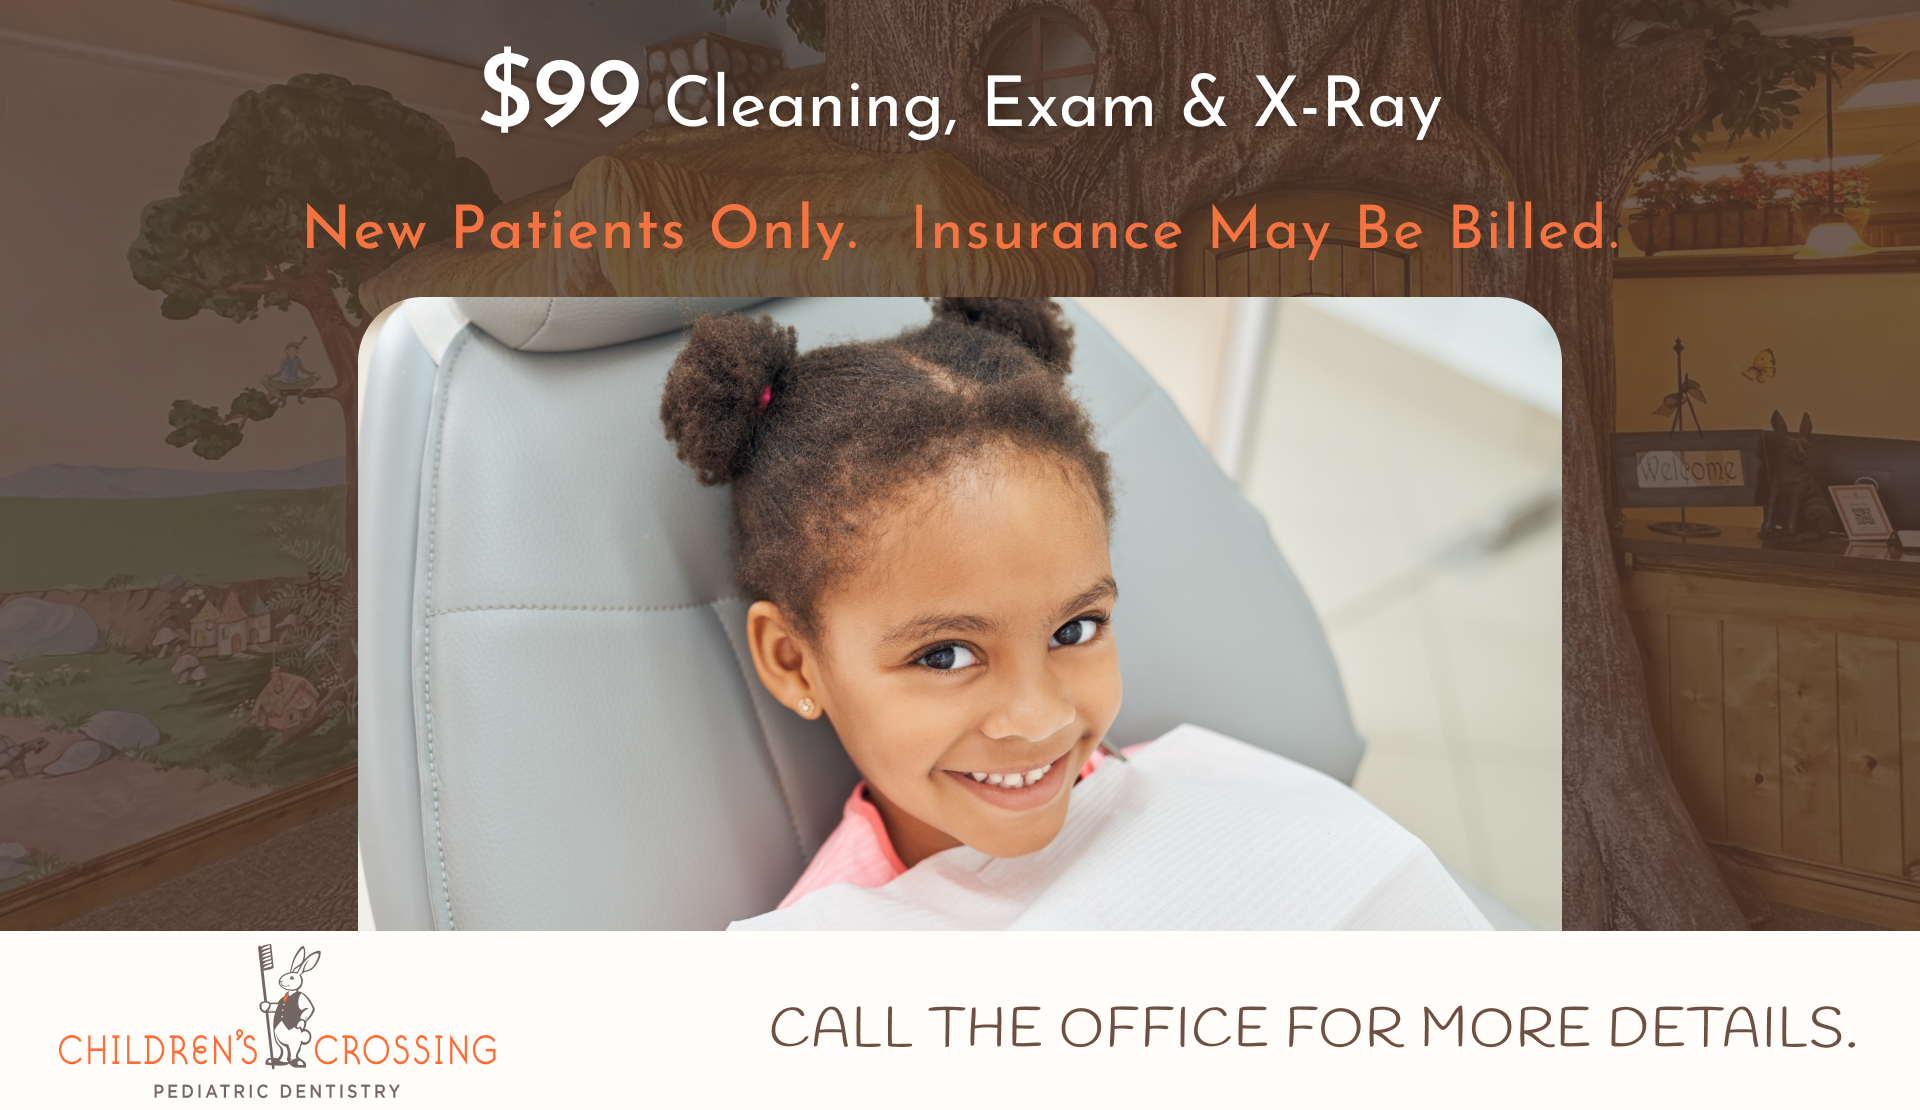 $99 Cleaning, Exam & X-Ray